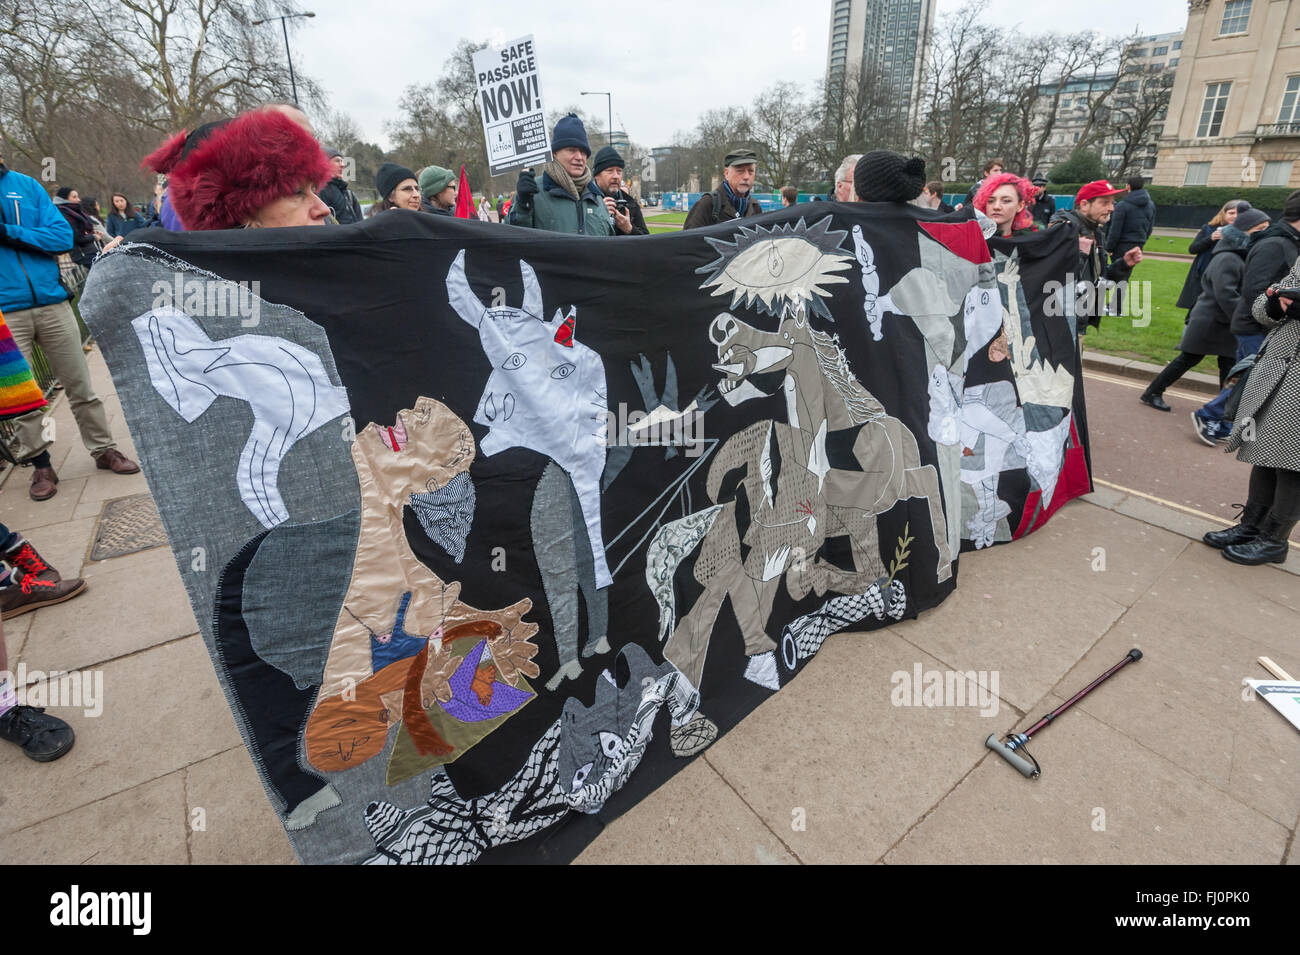 London, UK. 27th February 2016. People at Hyde Park Corner hold a banner made by Brighton refugee support groups based on Picasso's Guernica for the march to a rally at Marble Arch on the same day as protests in other cities across Europe to demand that authorities and governments take action now to open secure safe passage routes for all refugees and asylum seekers seeking protection in Europe. They want an end to deaths at borders and for refugees to be allowed to keep their possessions and be reunited with their families. Peter Marshall, Alamy Live News Stock Photo